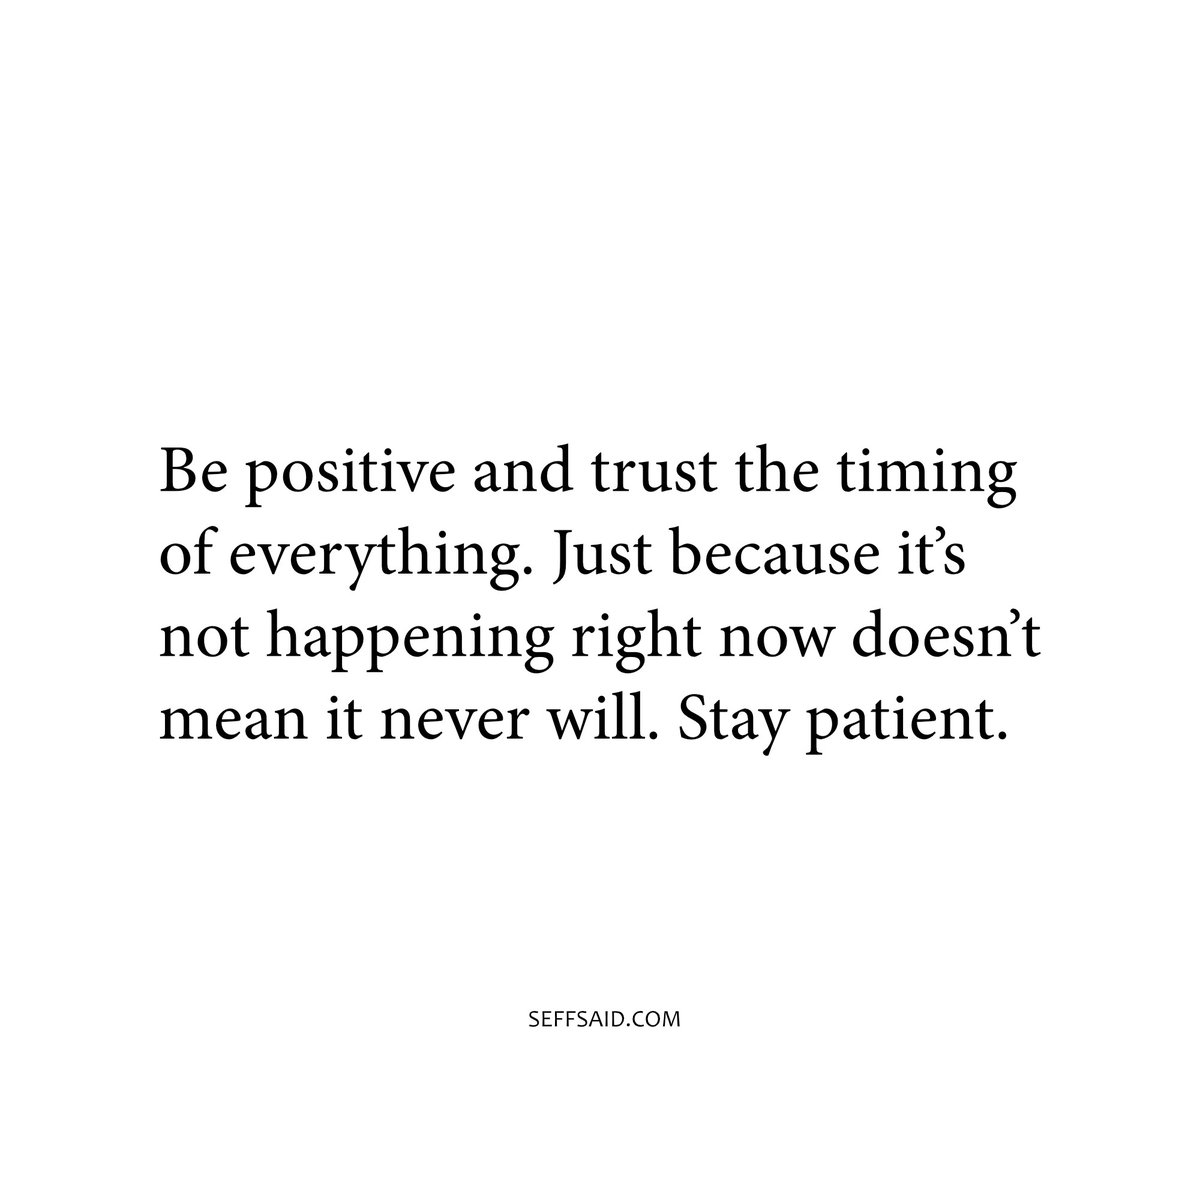 Stay patient